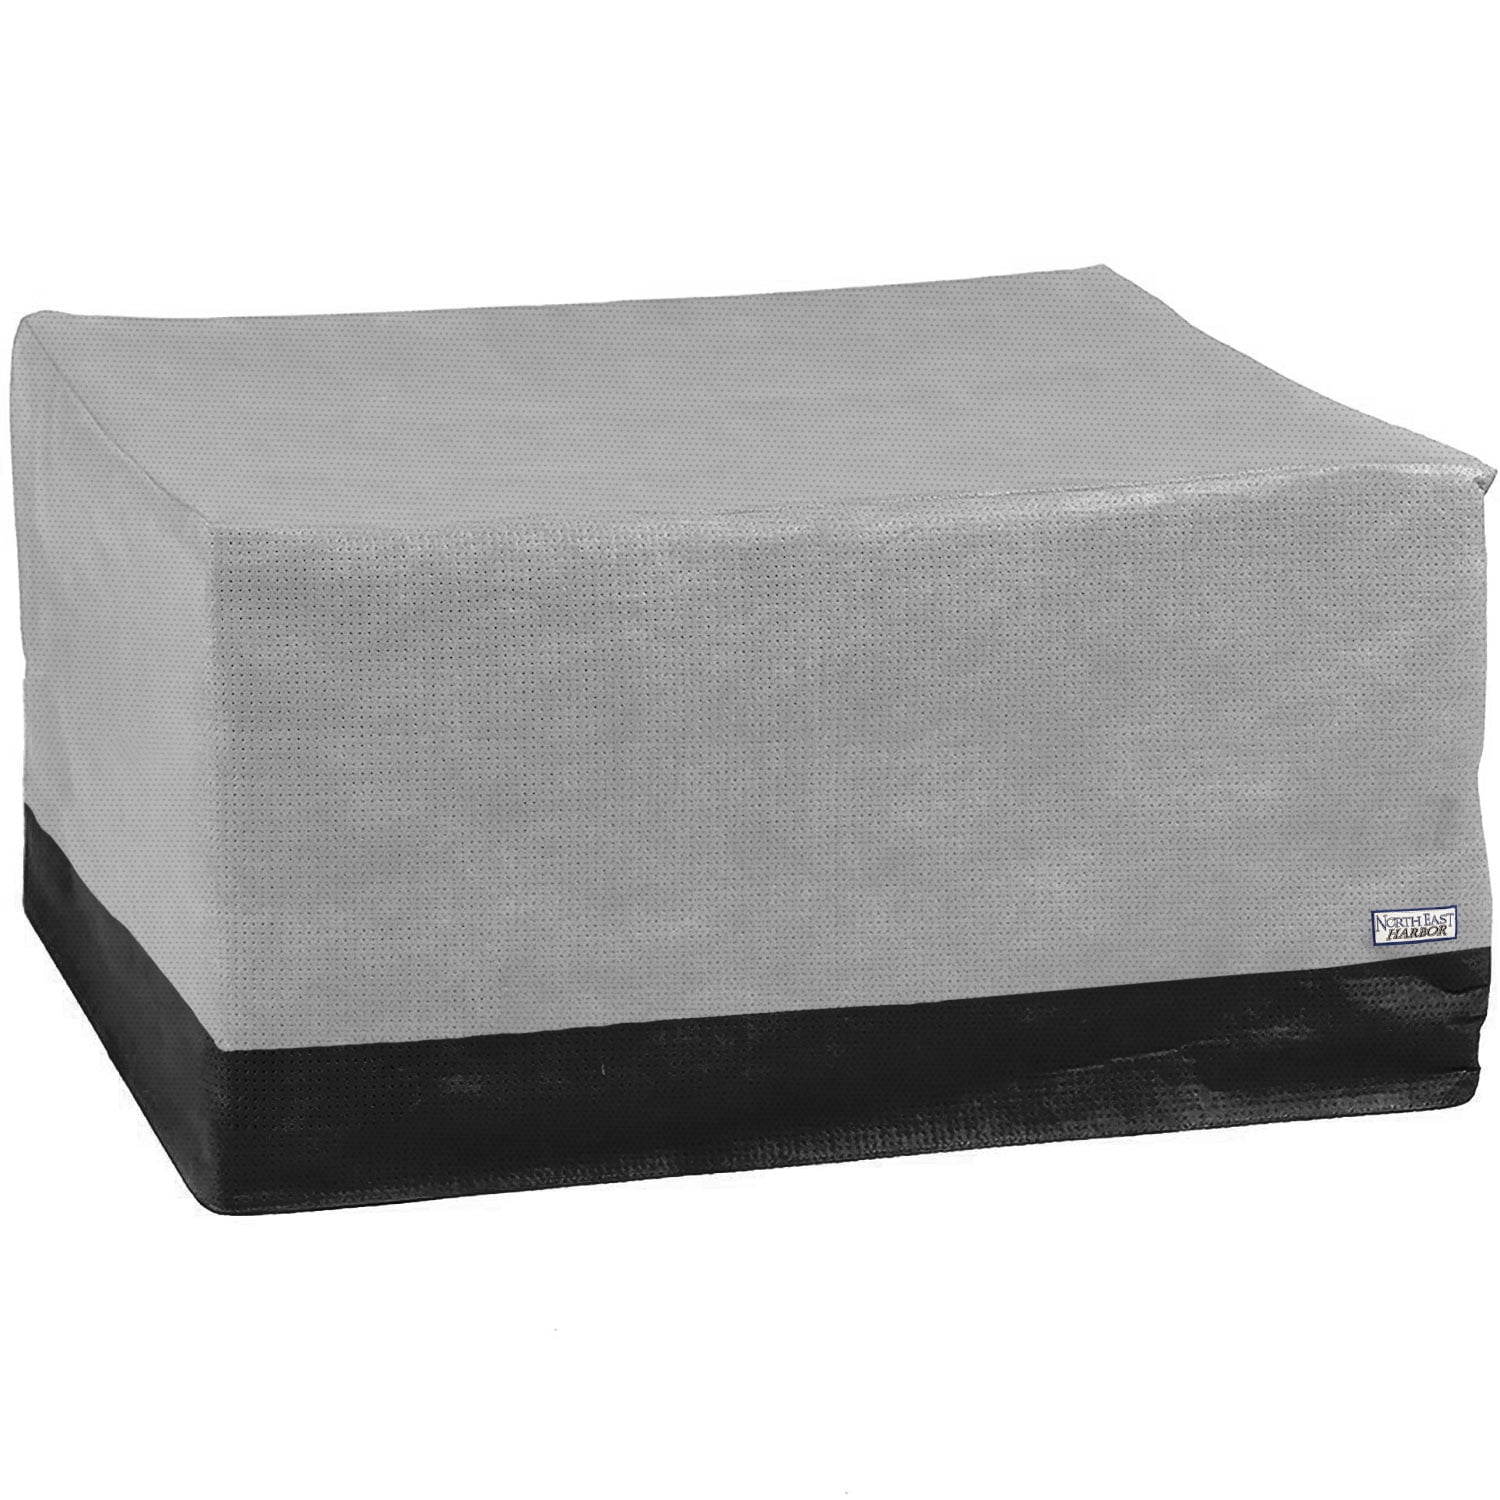 Breathable Material Gray with Black Hem UV Protected 40 L x 38 W x 18 H and Weather Resistant Storage Cover North East Harbor Outdoor Patio Square Ottoman/Side Table Furniture Cover 